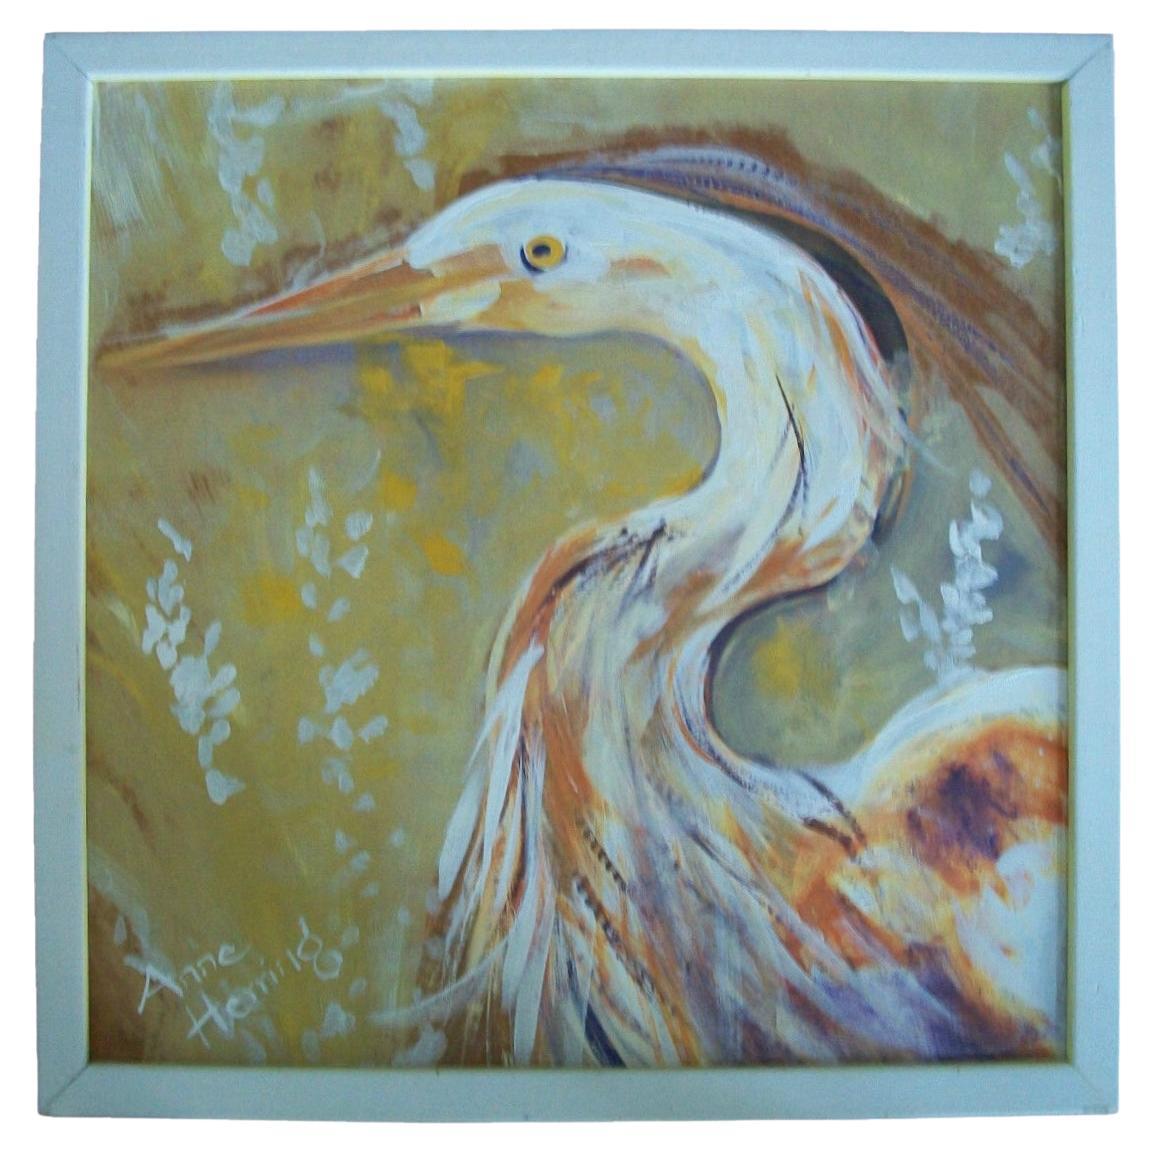 ANNE HERRING - 'Full Plumage' - Framed Acrylic Painting - U.S.A. - 20th Century For Sale